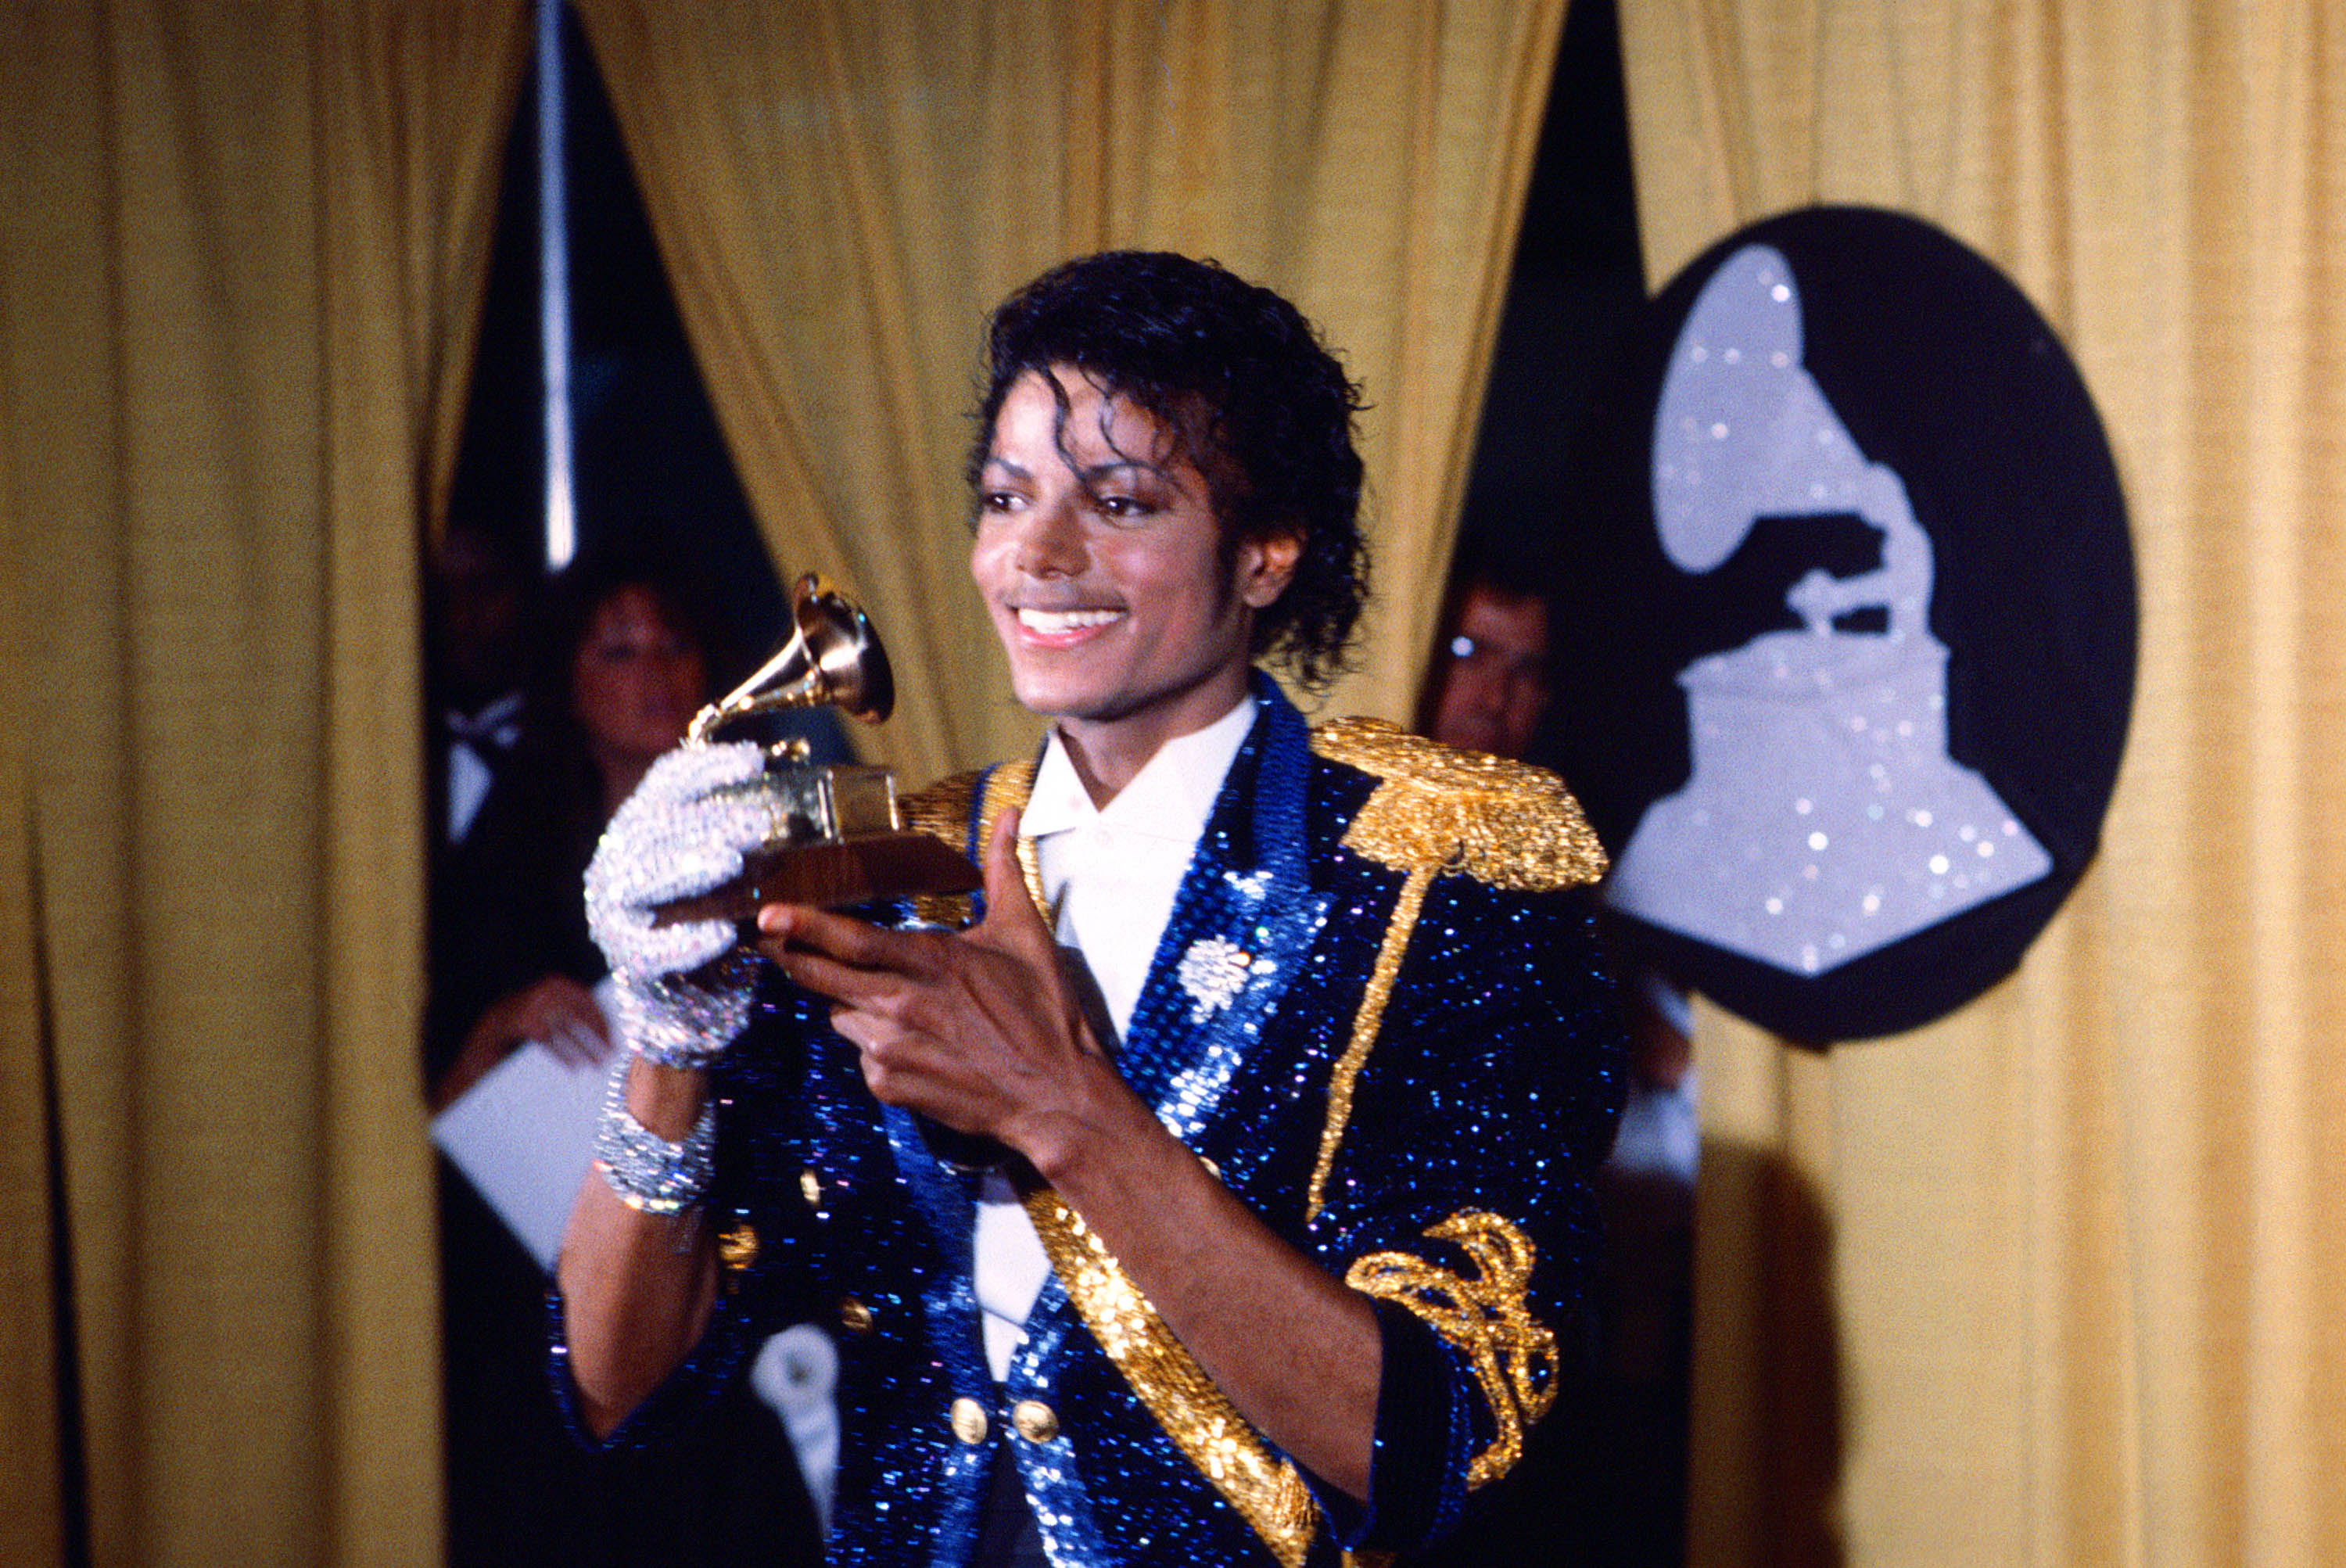 Michael Jackson at the 26th Annual Grammy Awards on February 24, 1993 in Los Angeles, California| Source: Getty Images